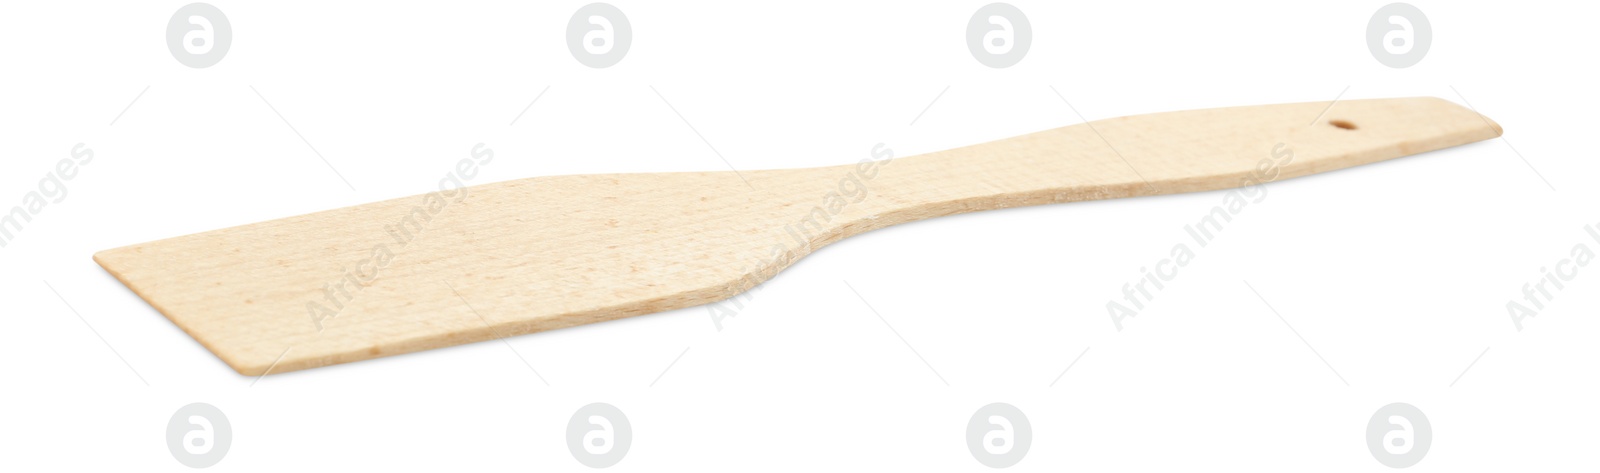 Photo of Wooden spatula isolated on white. Cooking utensil